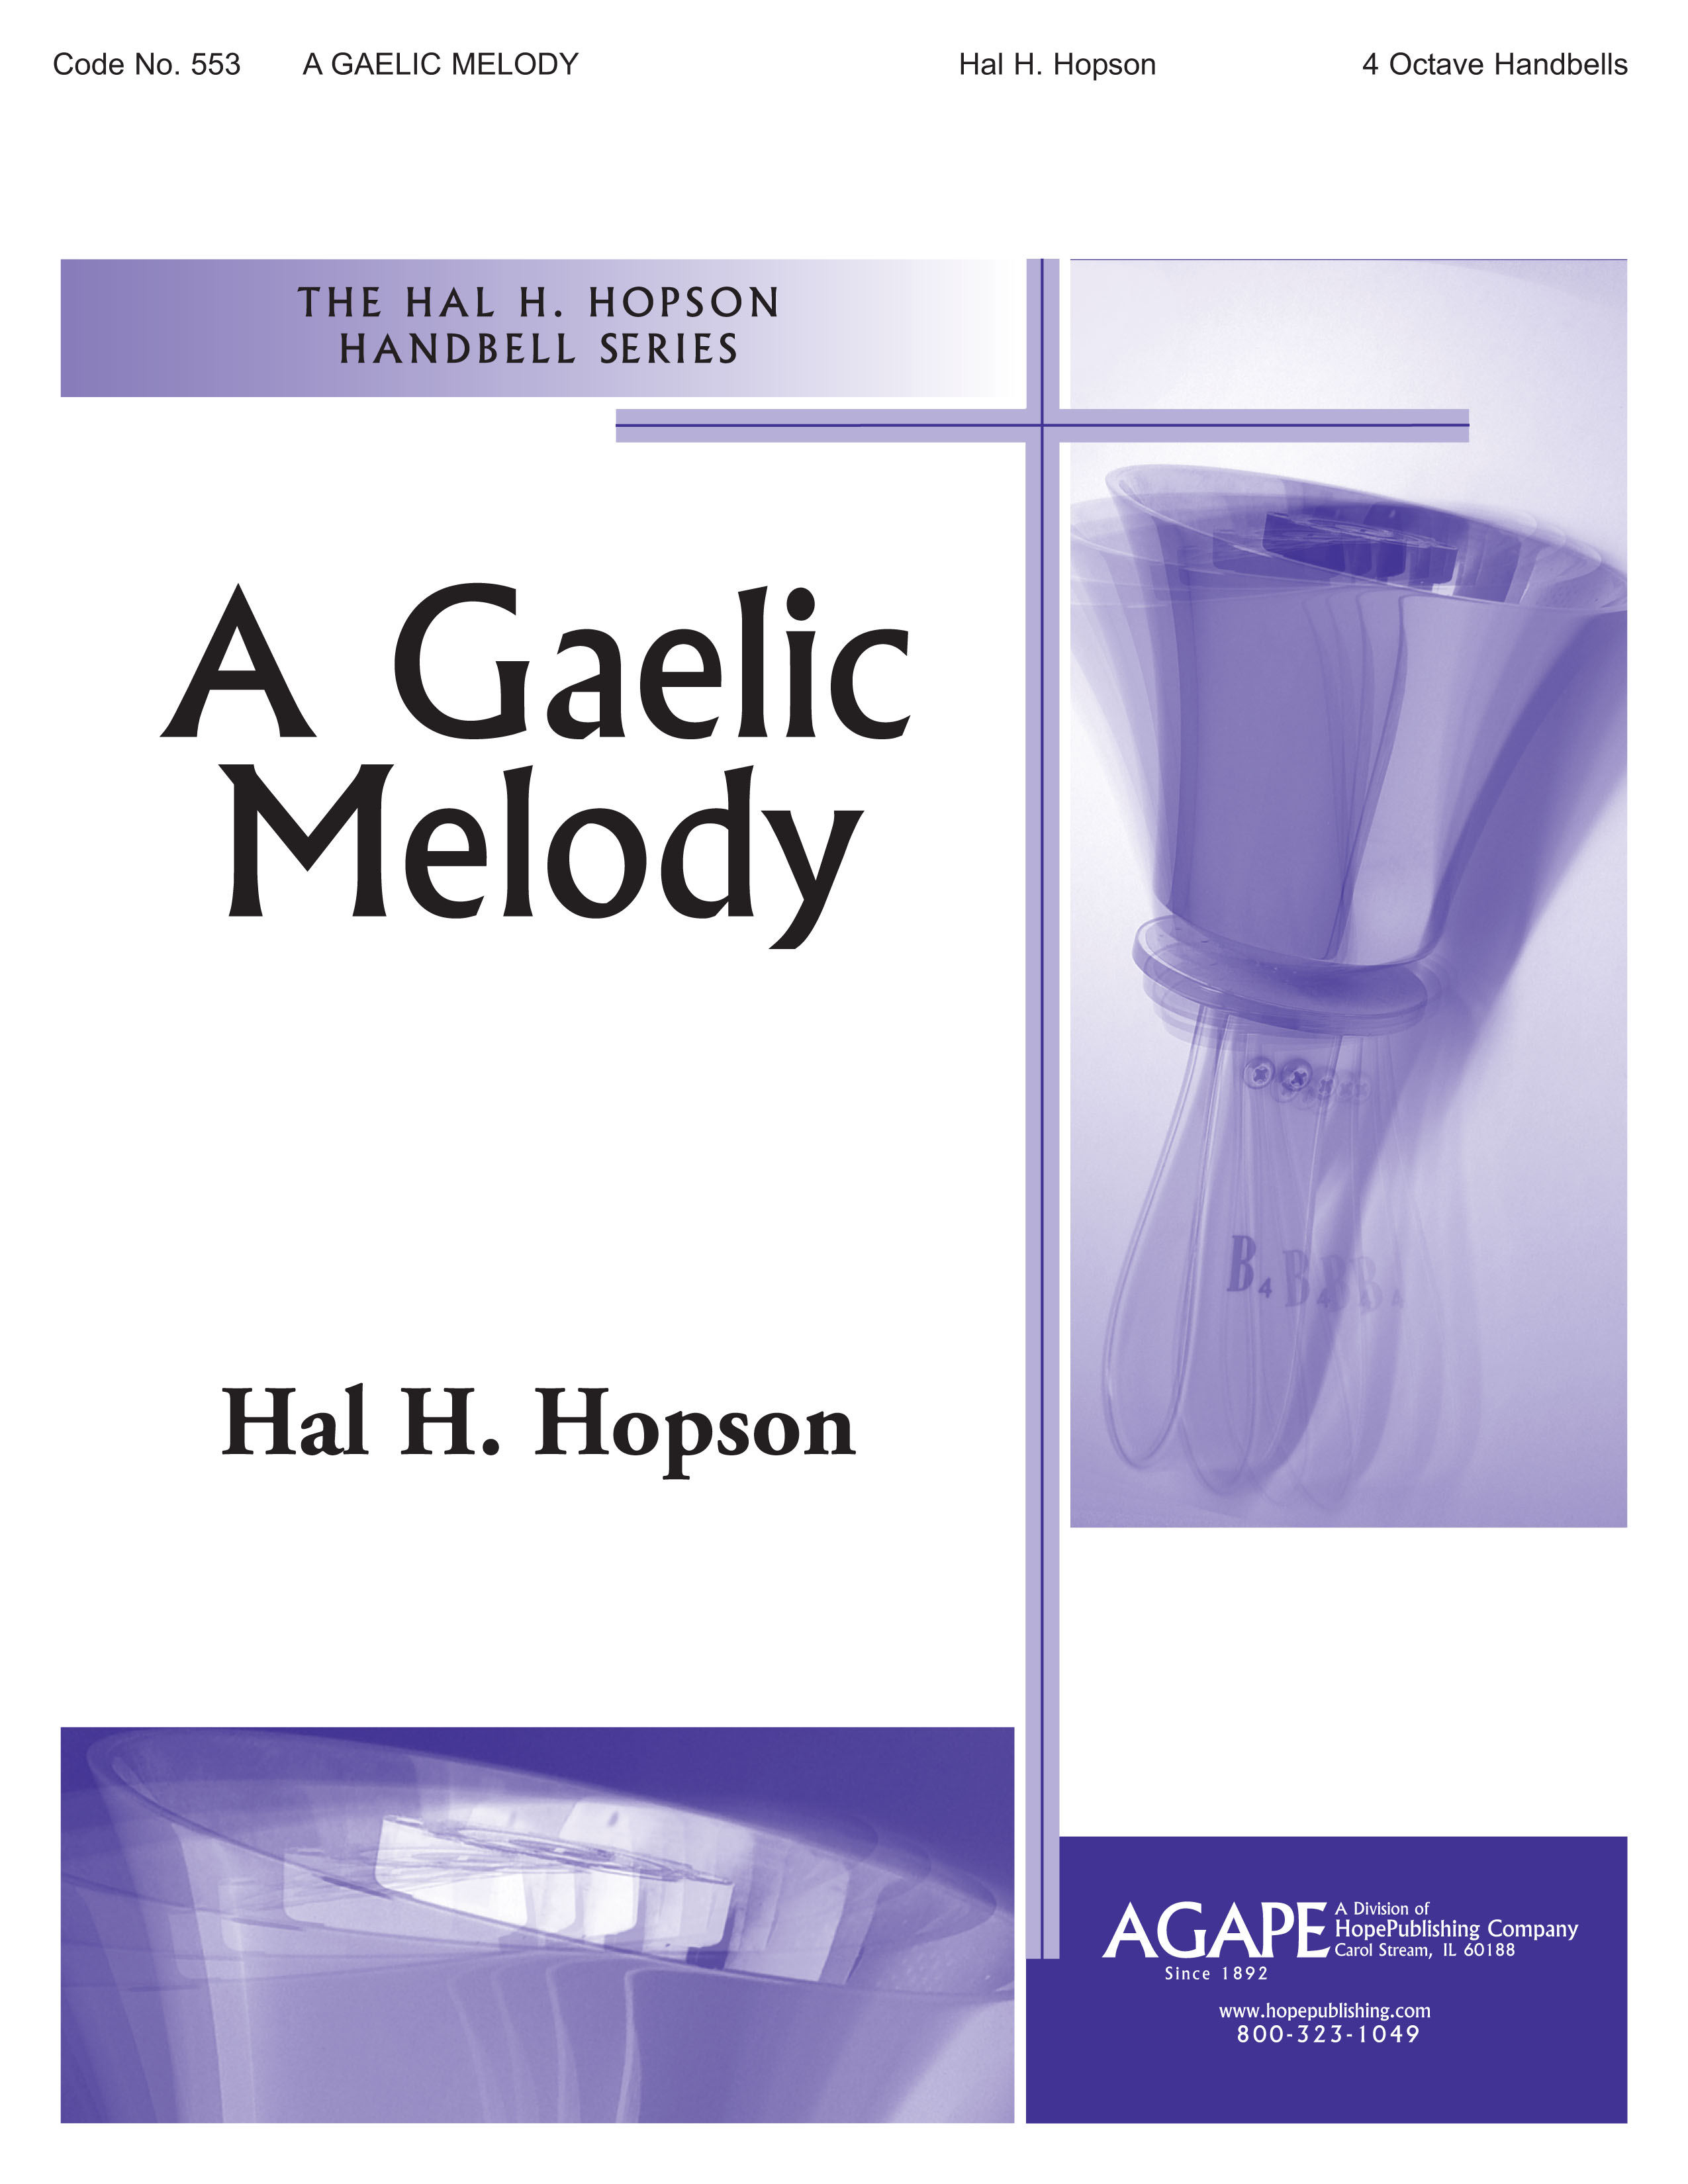 Gaelic Melody A - 4 Octave Cover Image